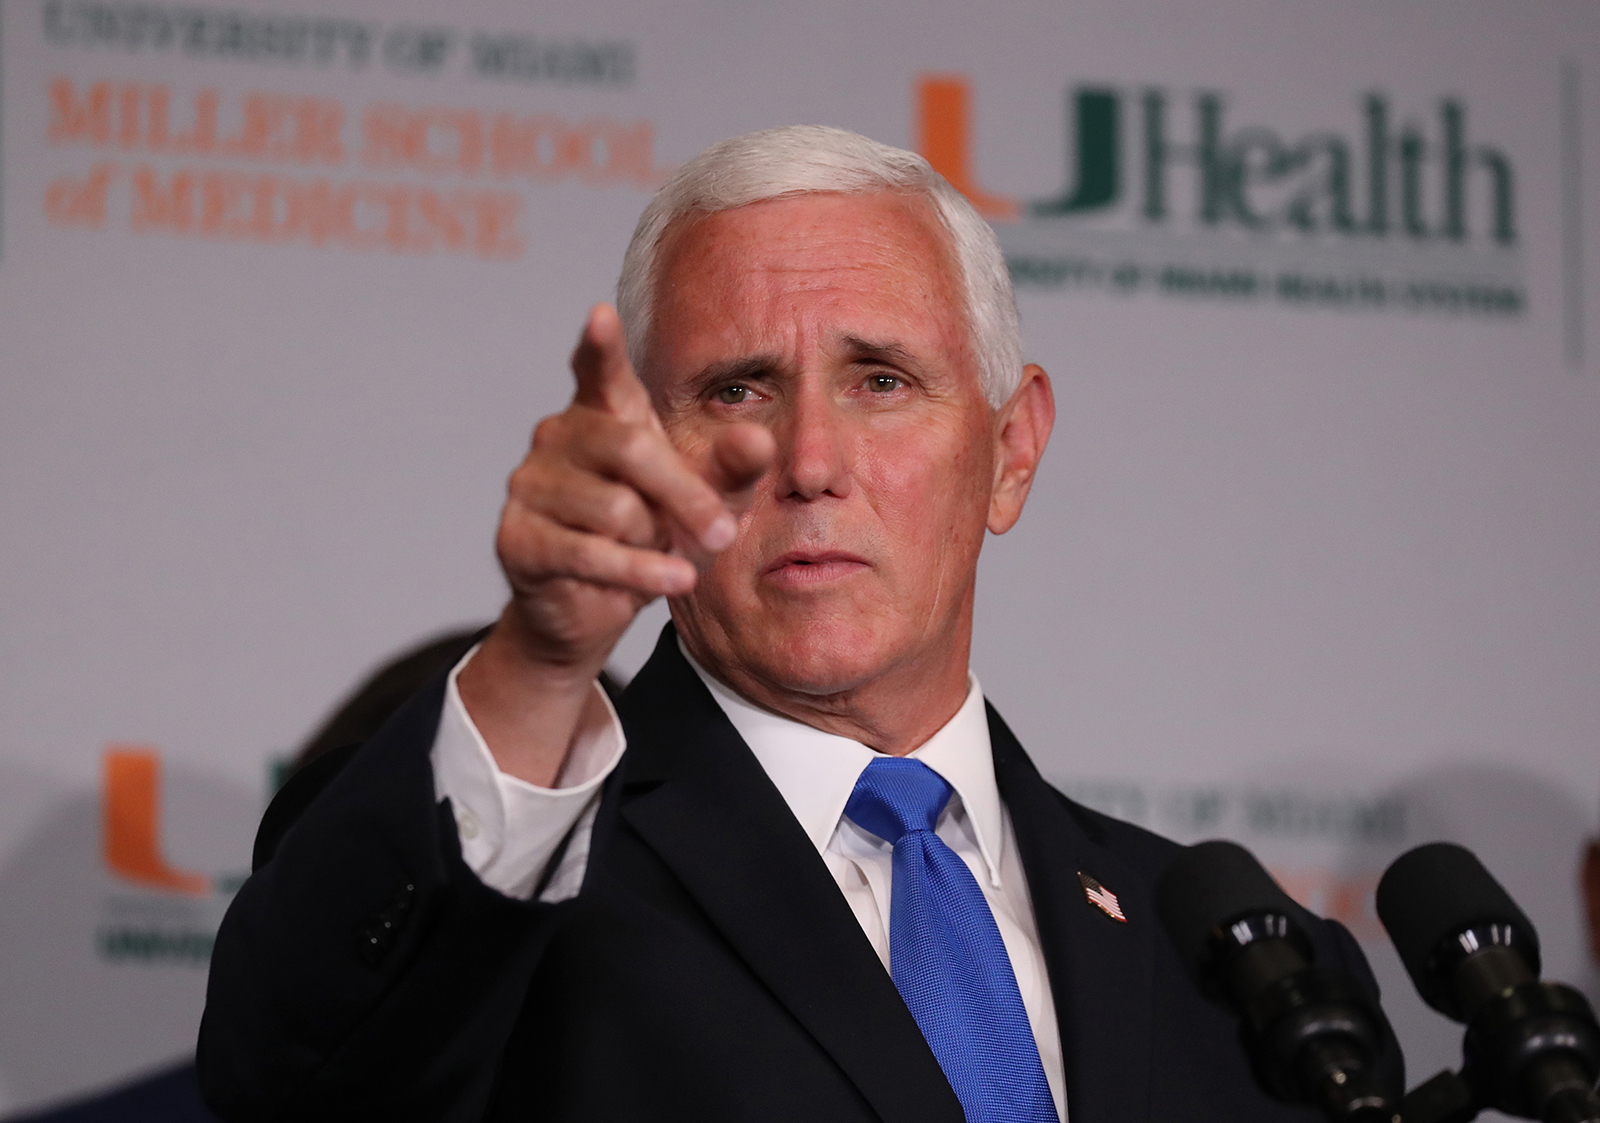 Vice President Mike Pence speaks during a press conference at the the University of Miami Miller School of Medicine on July 27 in Miami.